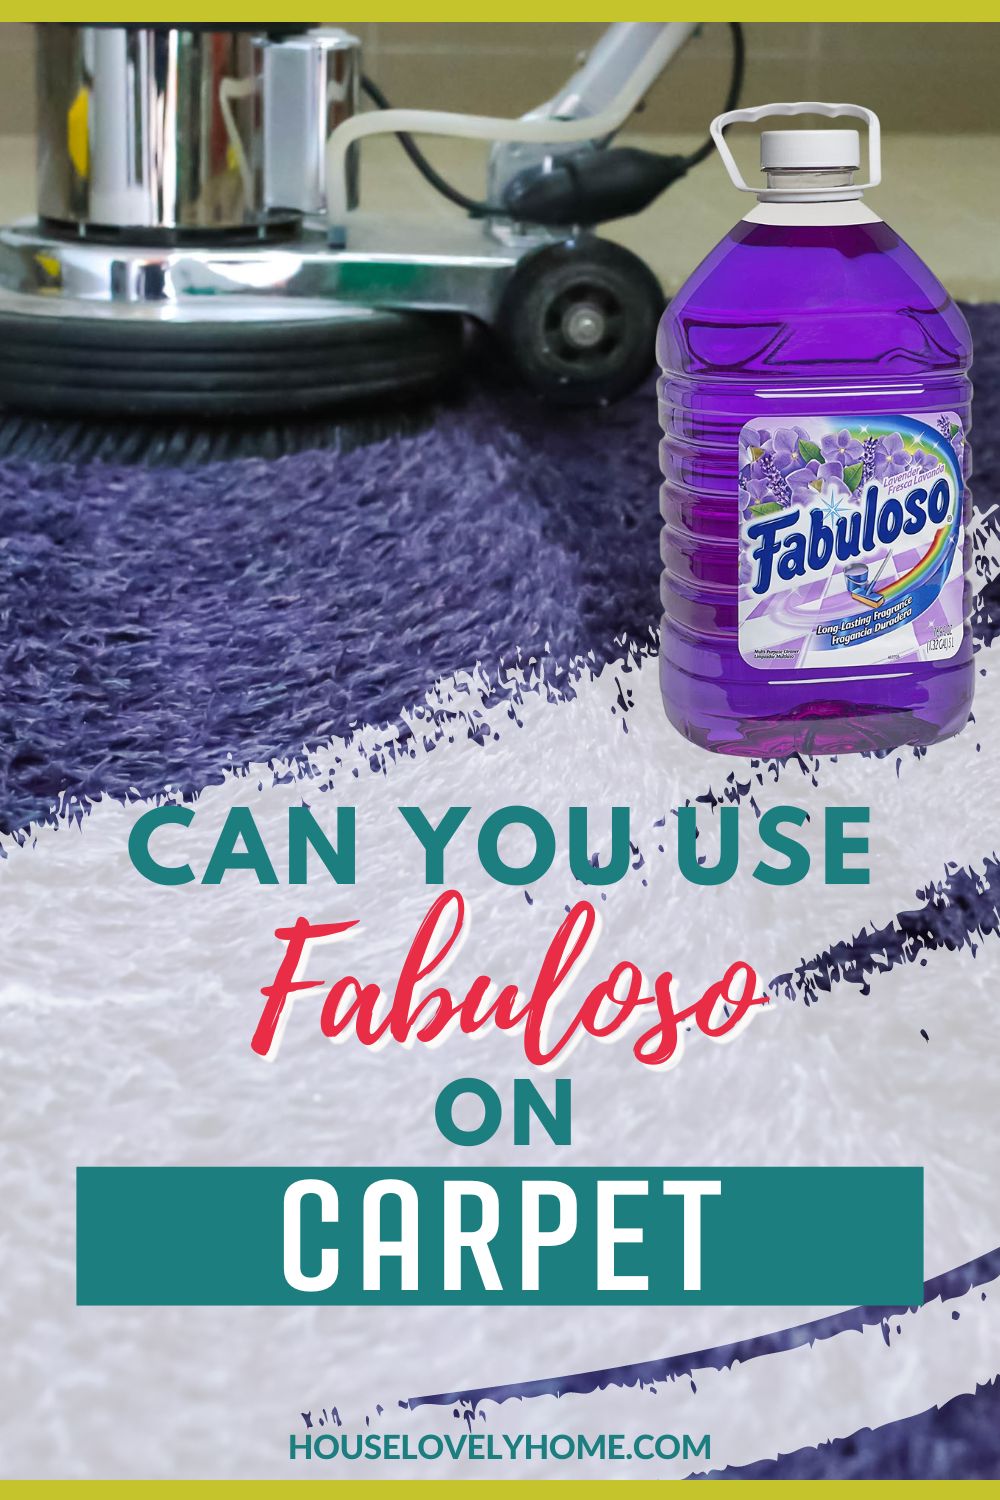 Photo showing a purple carpet being cleaned, a gallon of fabuloso with text overlay that read Can You Use Fabuloso on Carpet